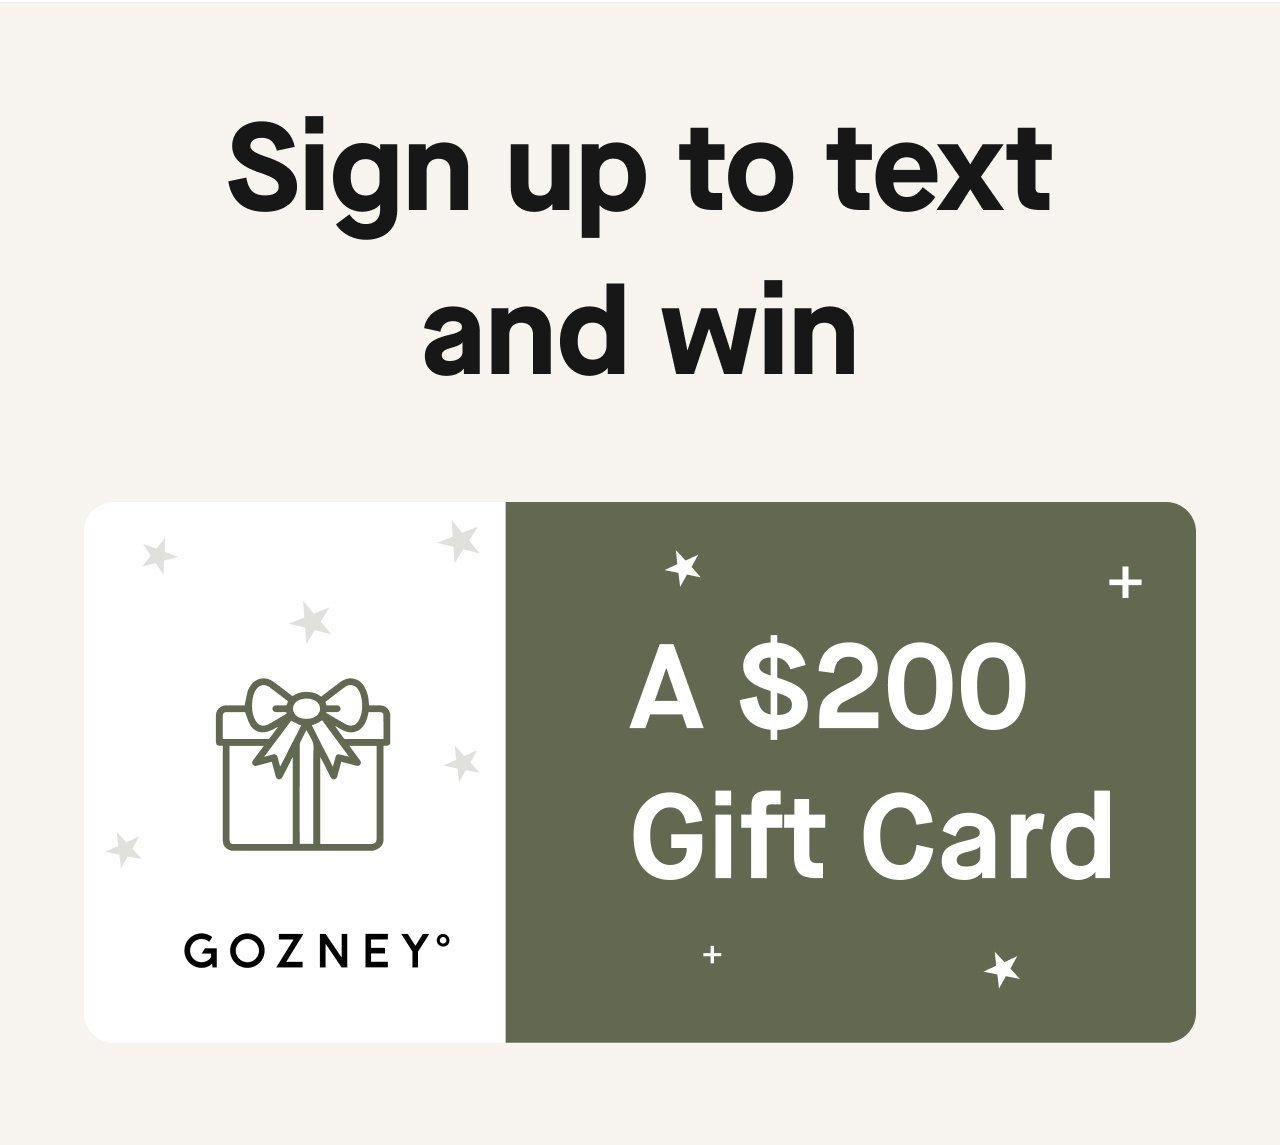 Sign up to text and win